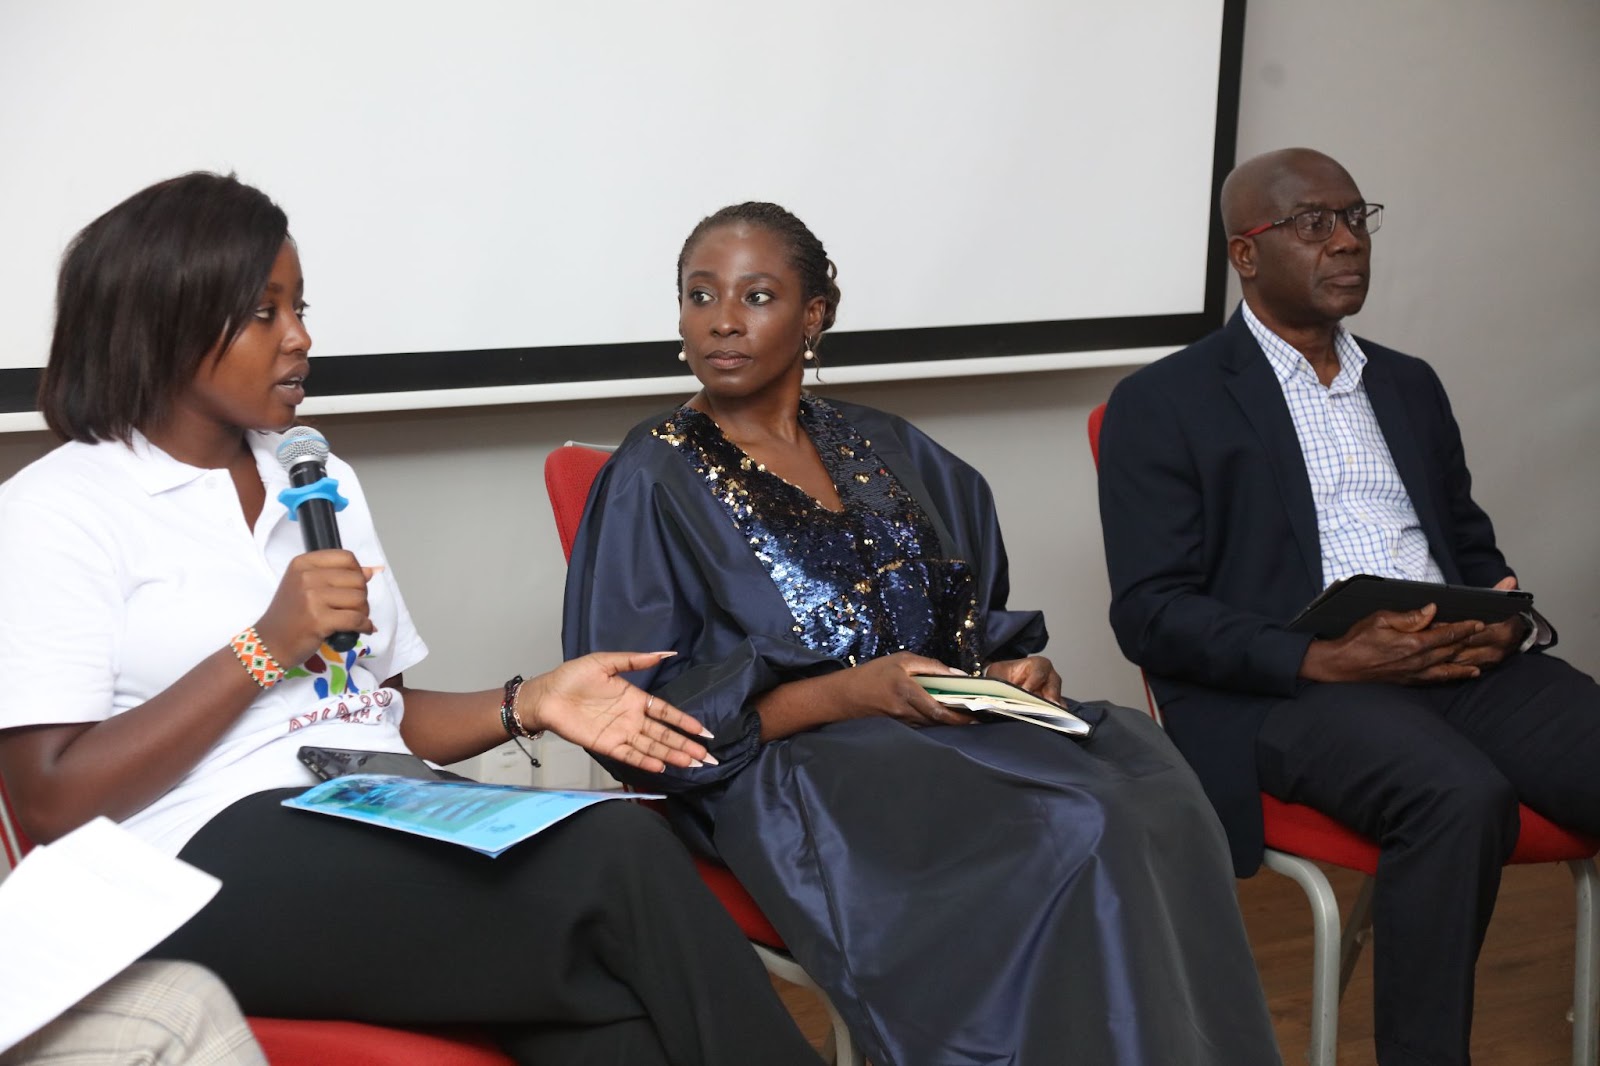 Left to Right: Ms Anita Soina, A Climate Justice Advocate,Ms Serah Makka, ONE Africa Executive Director and ·   Dr. John Asafu-Adjaye, Senior fellow, Africa Centre for Economic Transformation during the One Campaign media briefing at the start of the Africa Climate Summit in Nairobi Kenya.